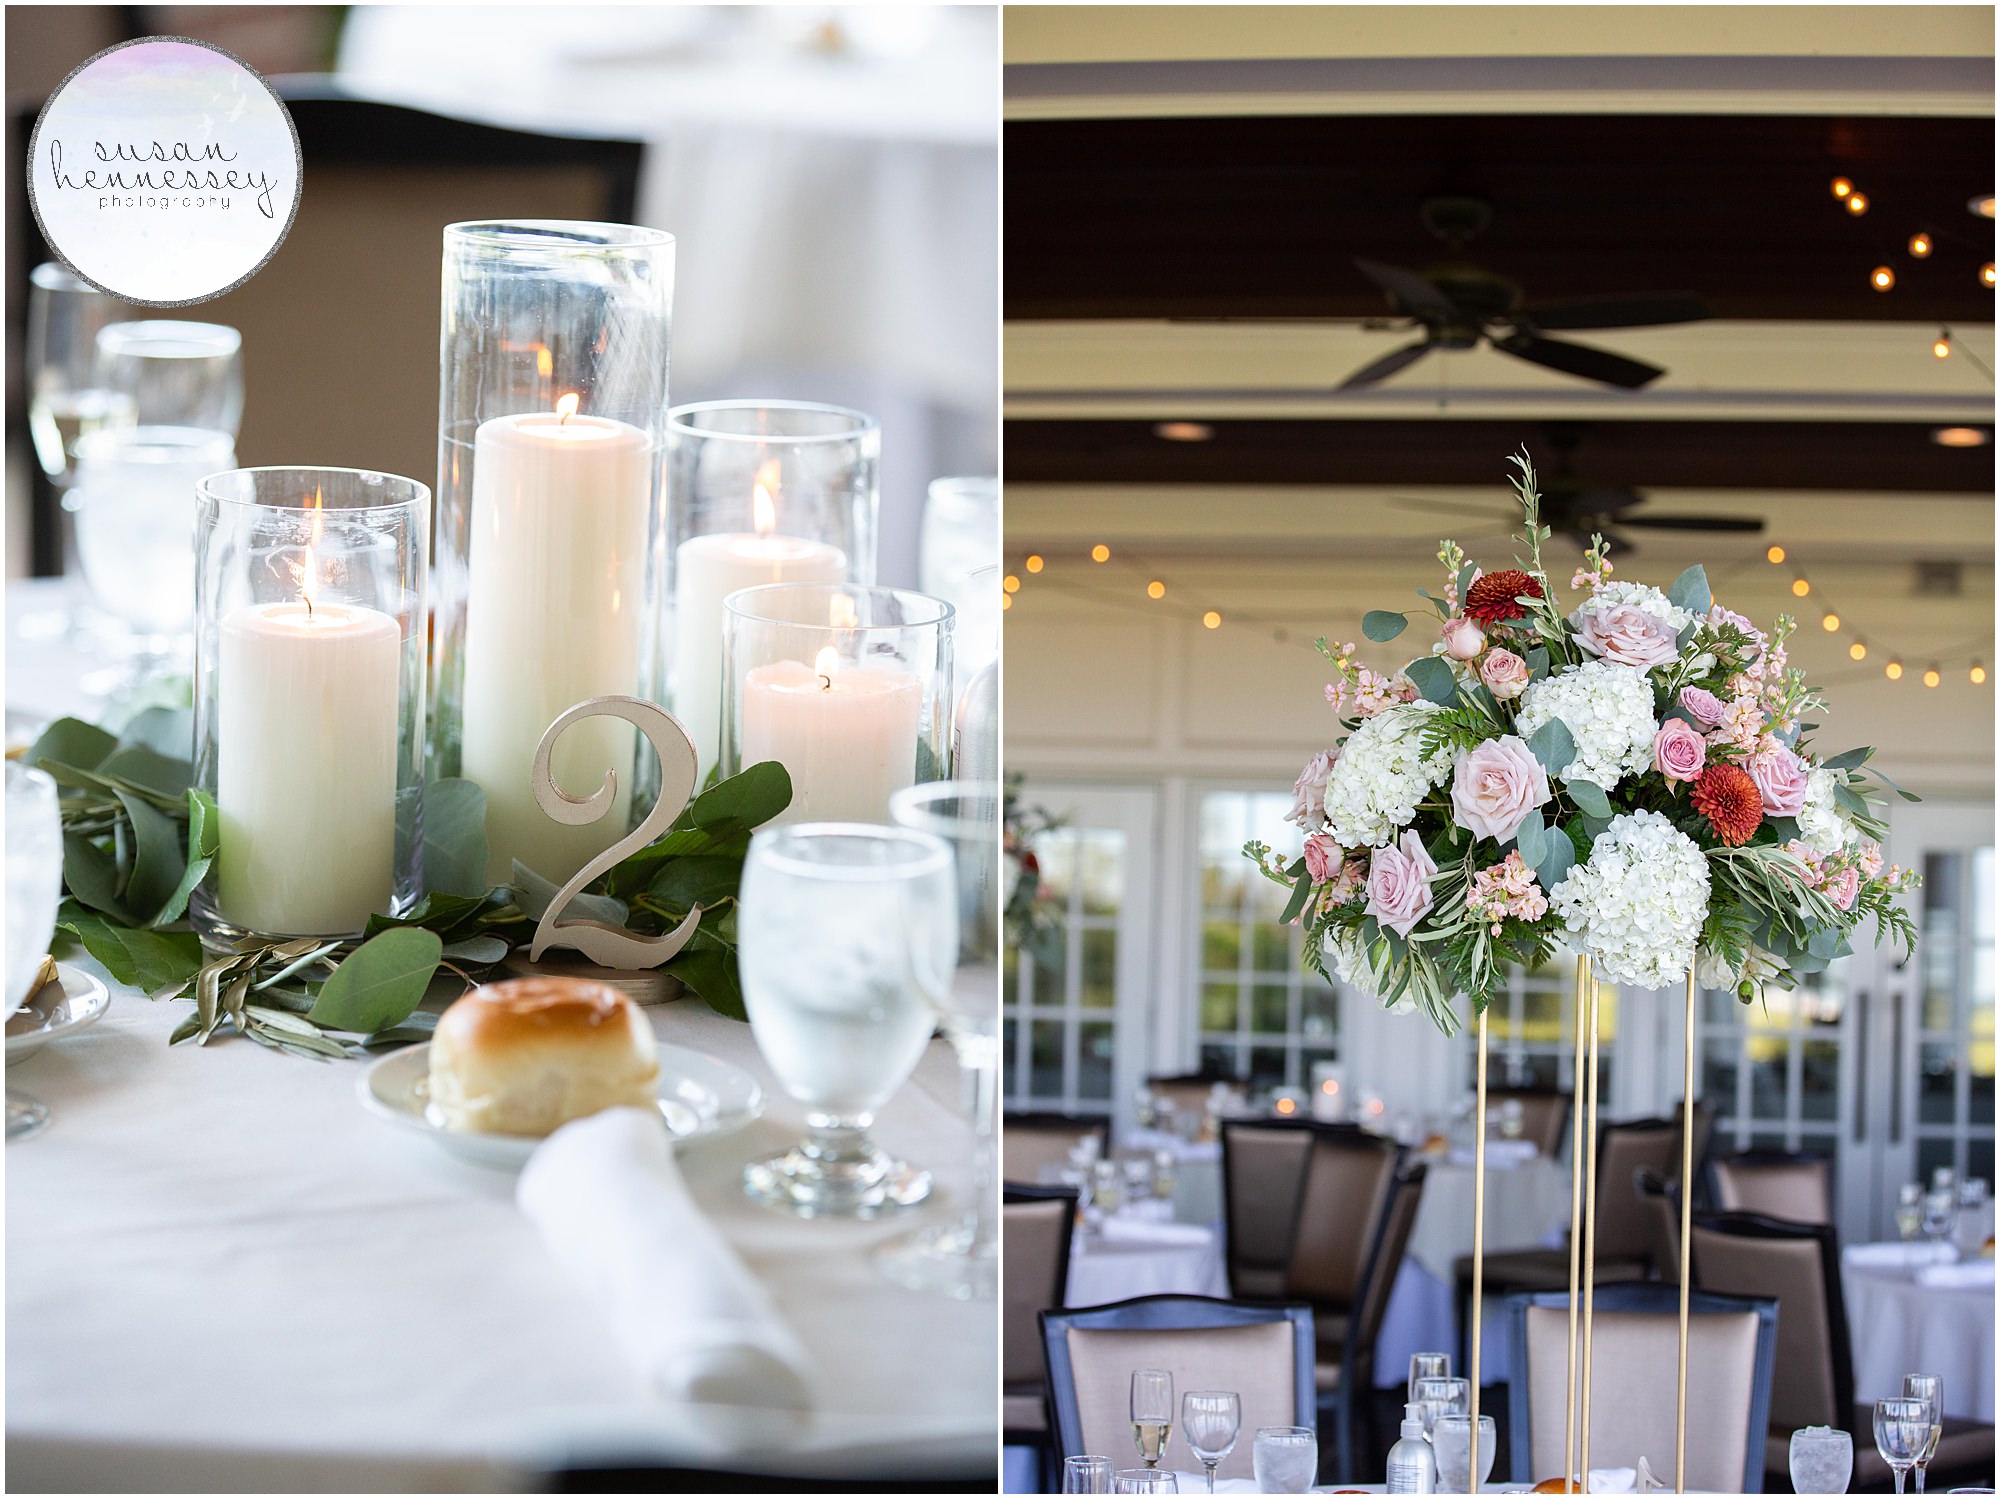 Reception details at Atlantic City Country Club wedding